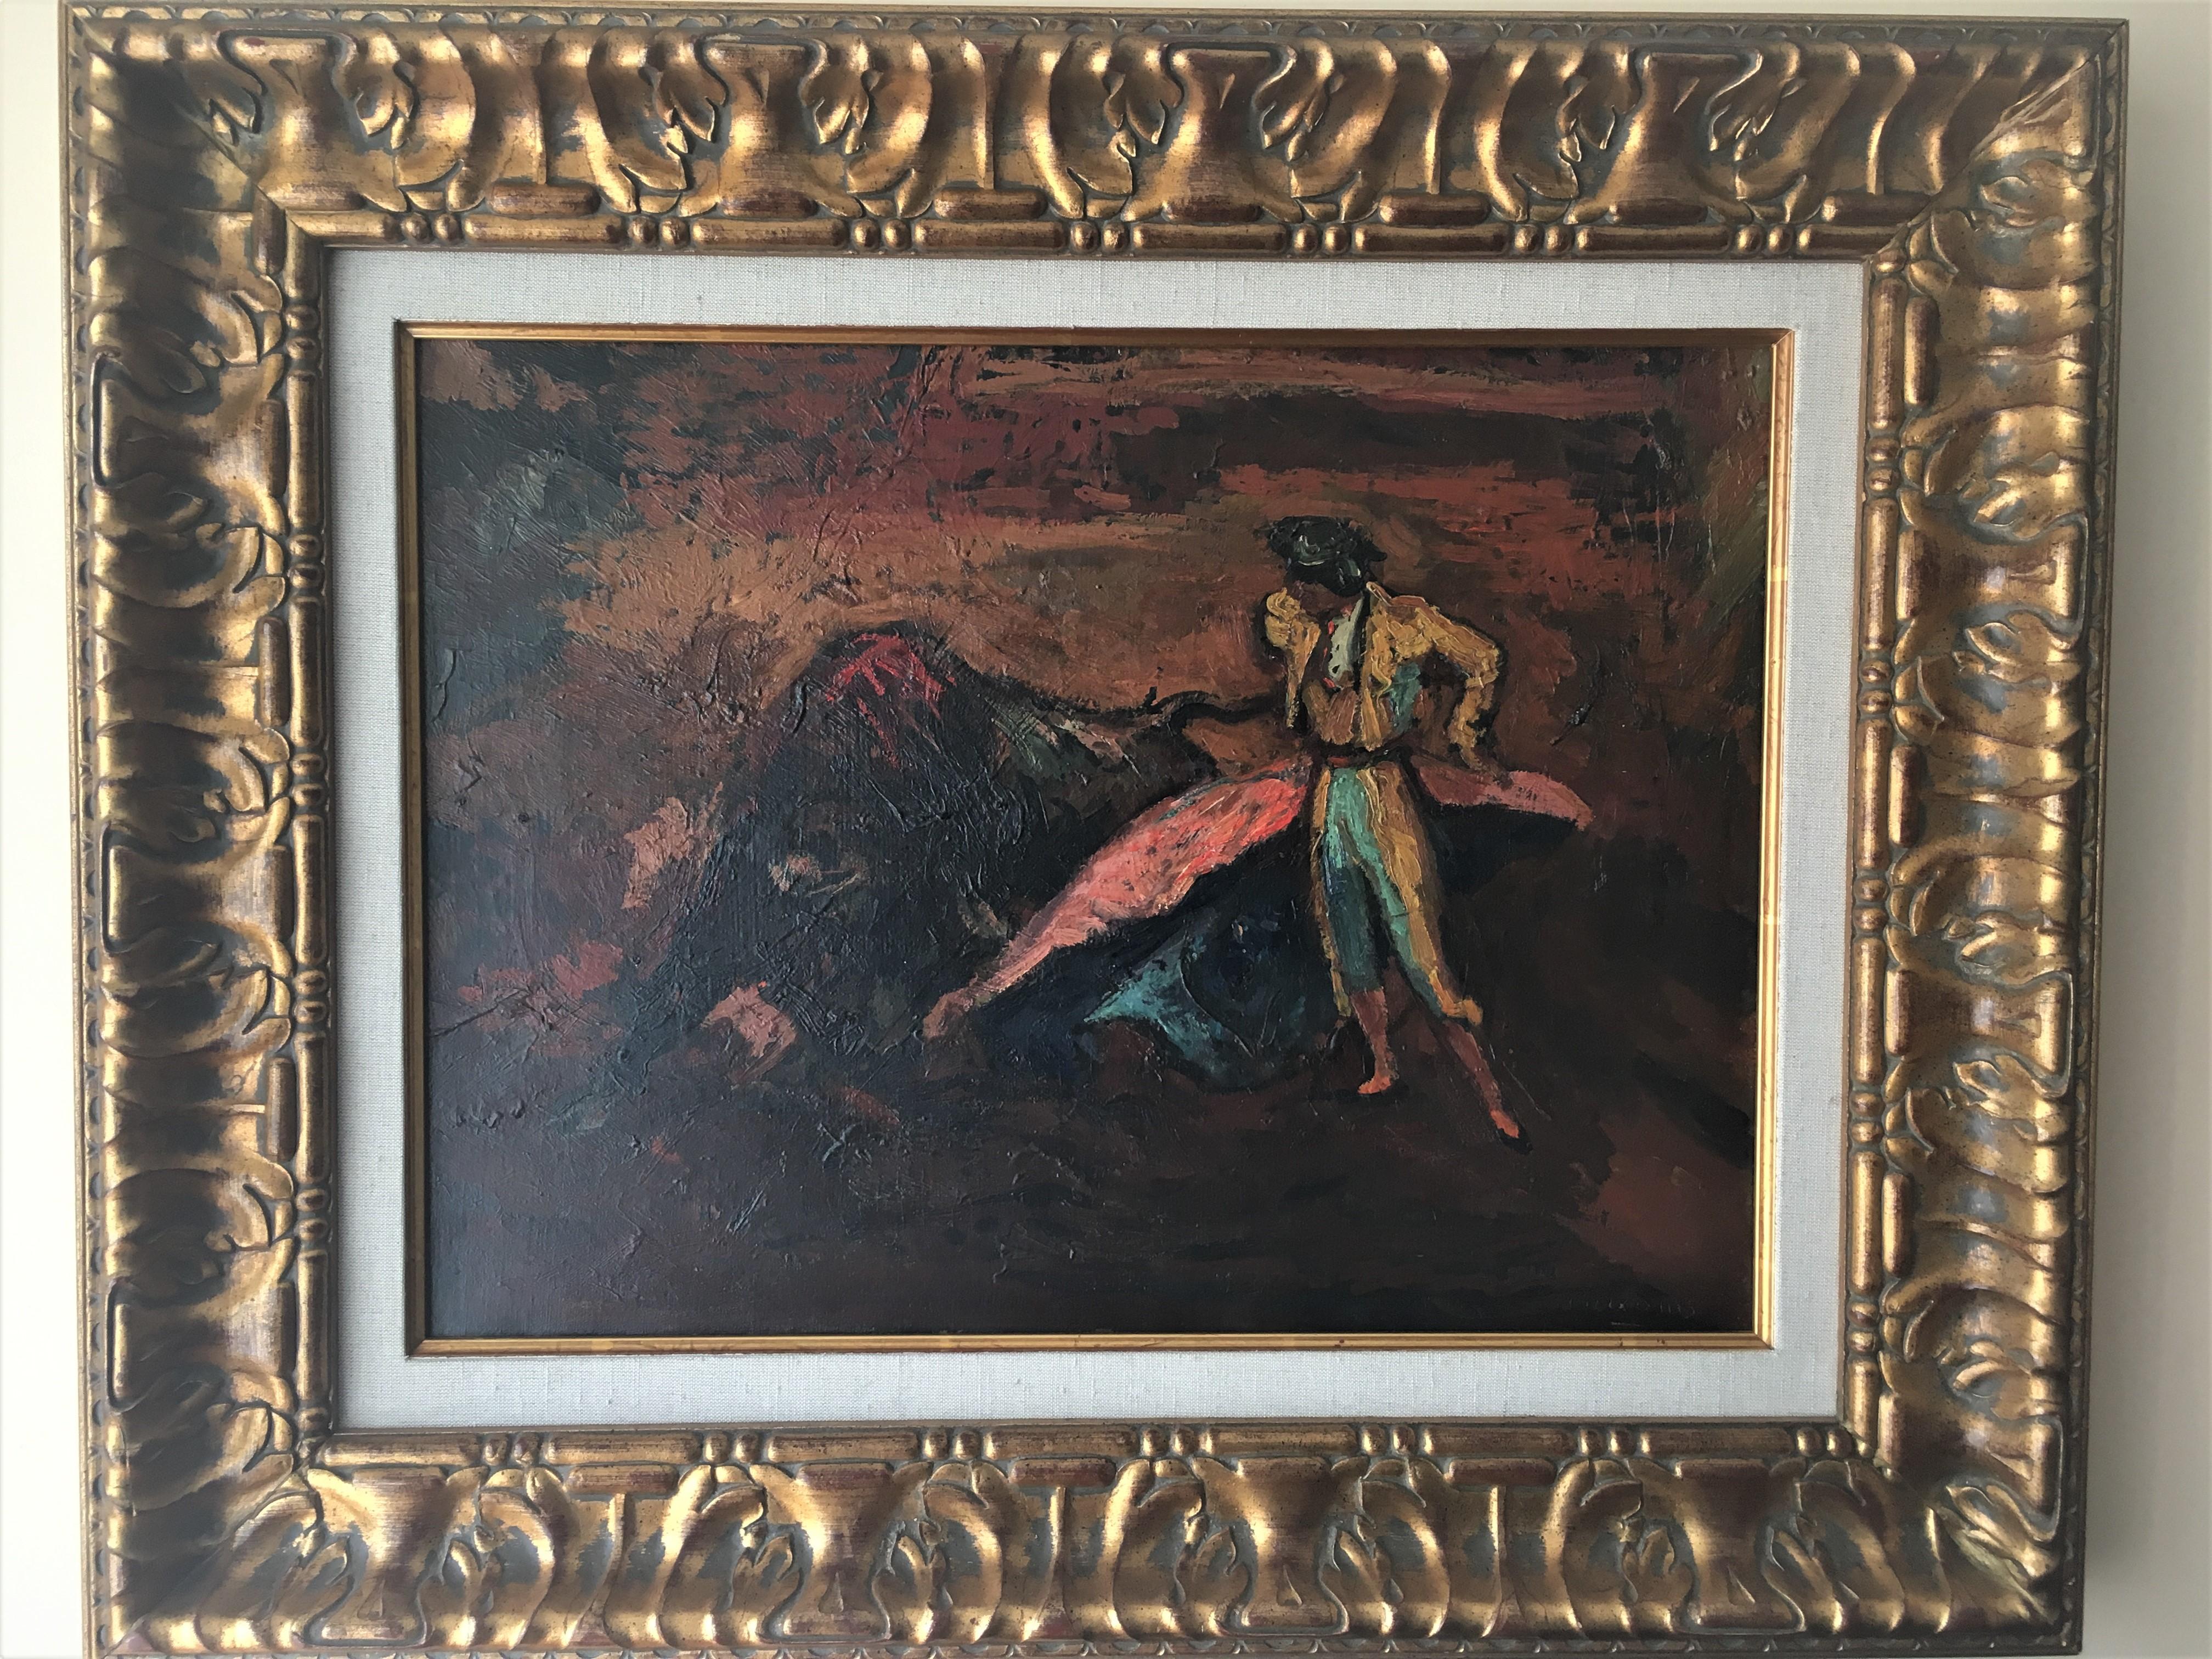 Creixams  14 Bullfighter and Bull original impressionist acrylic canvas painting - Impressionist Painting by Pere Créixams Picó